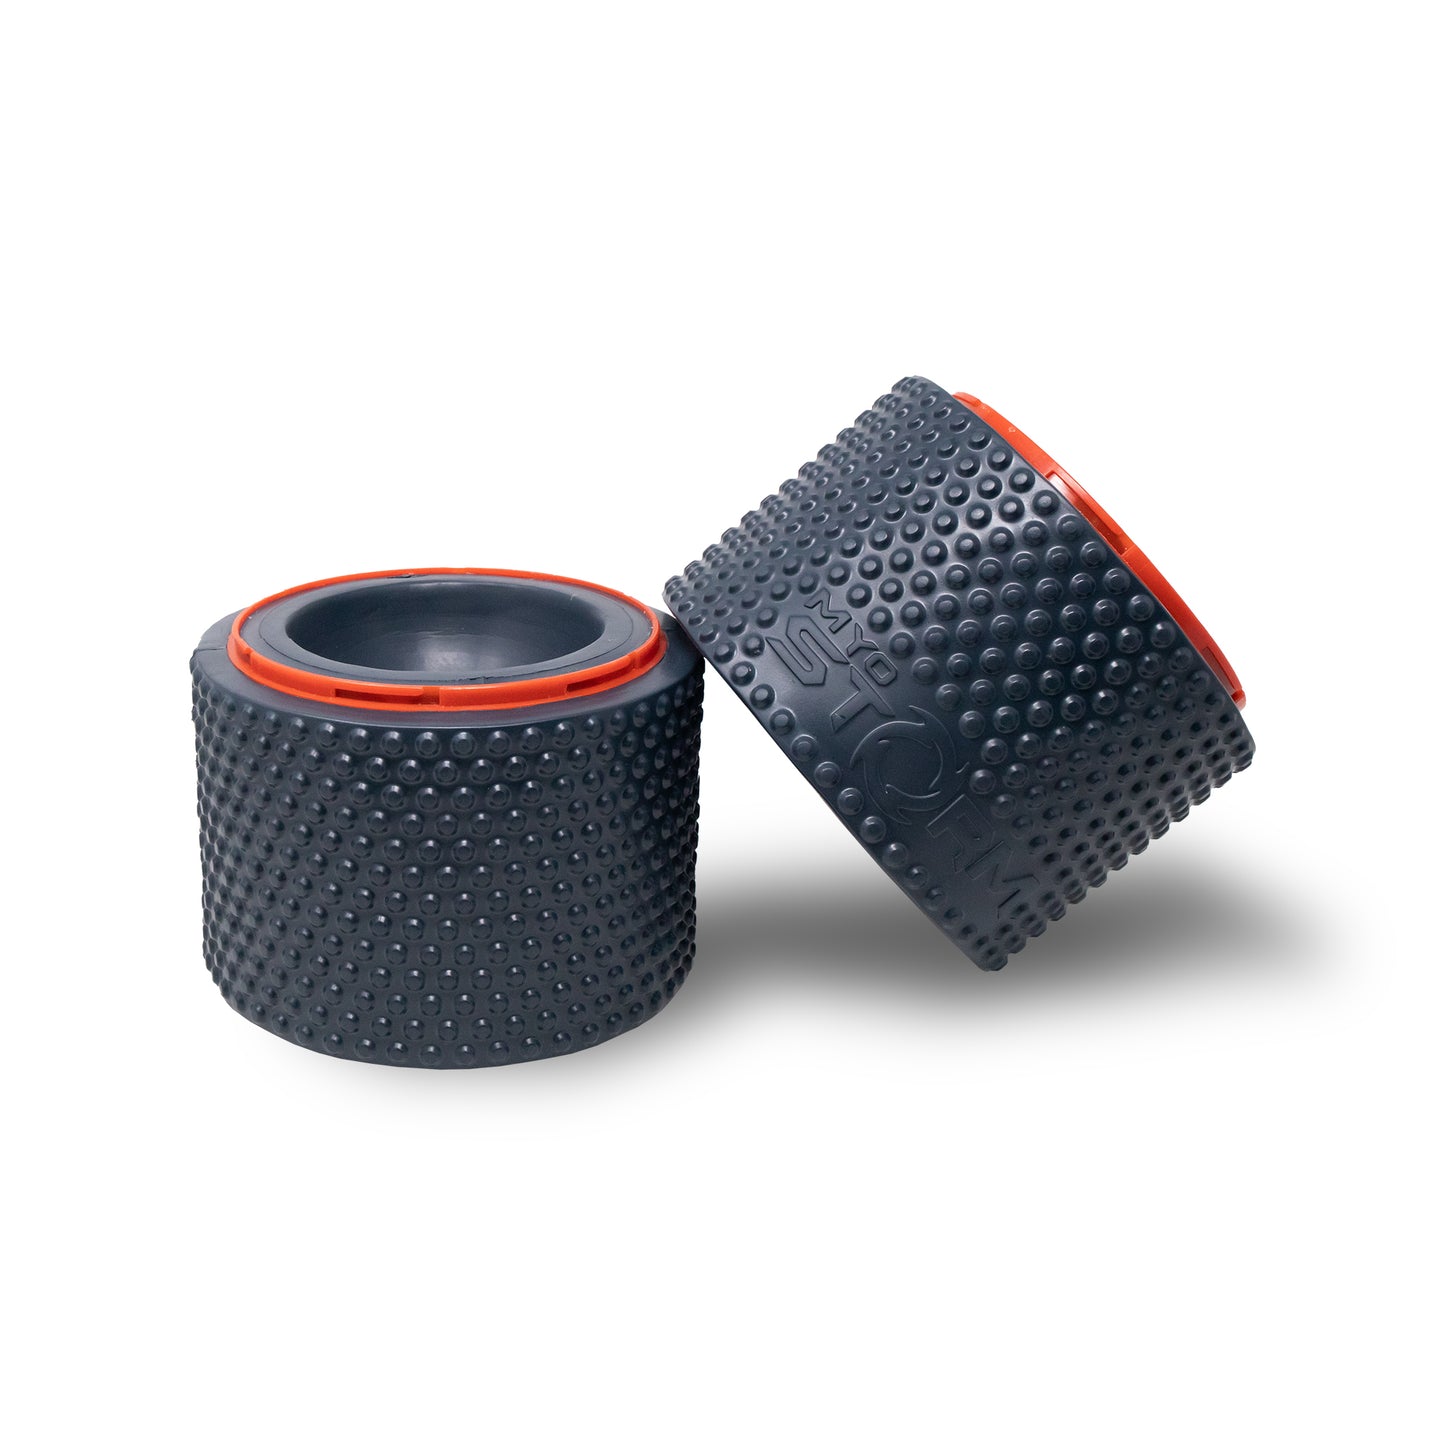 3-in-1 Recovery Roller